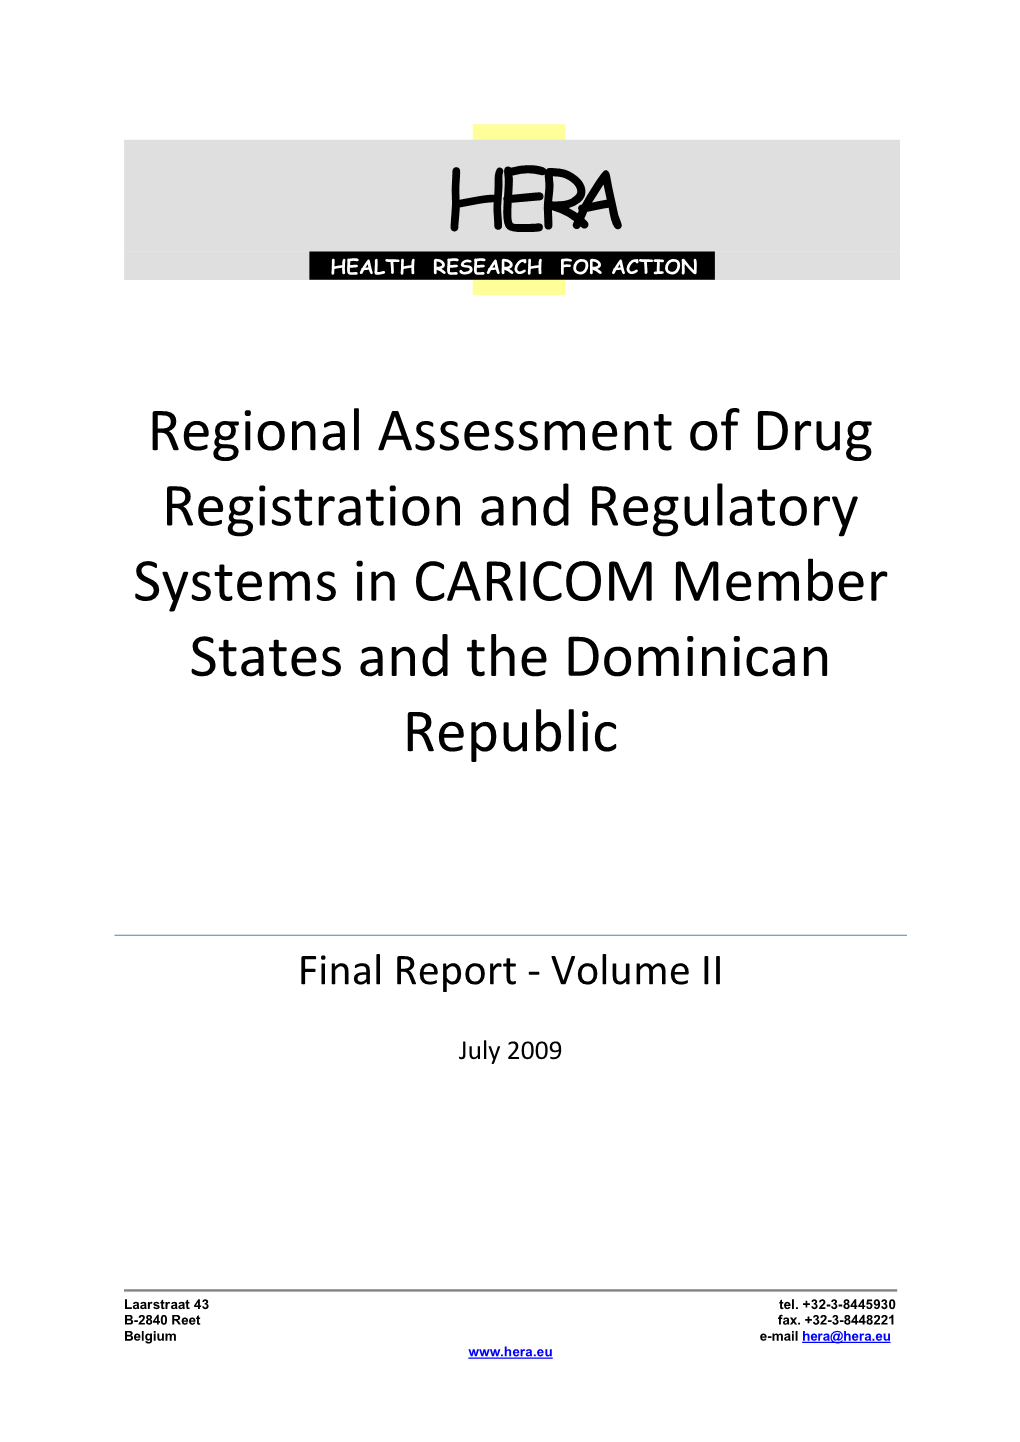 Regional Assessment of Drug Registration and Regulatory Systems in CARICOM Member States and the Dominican Republic